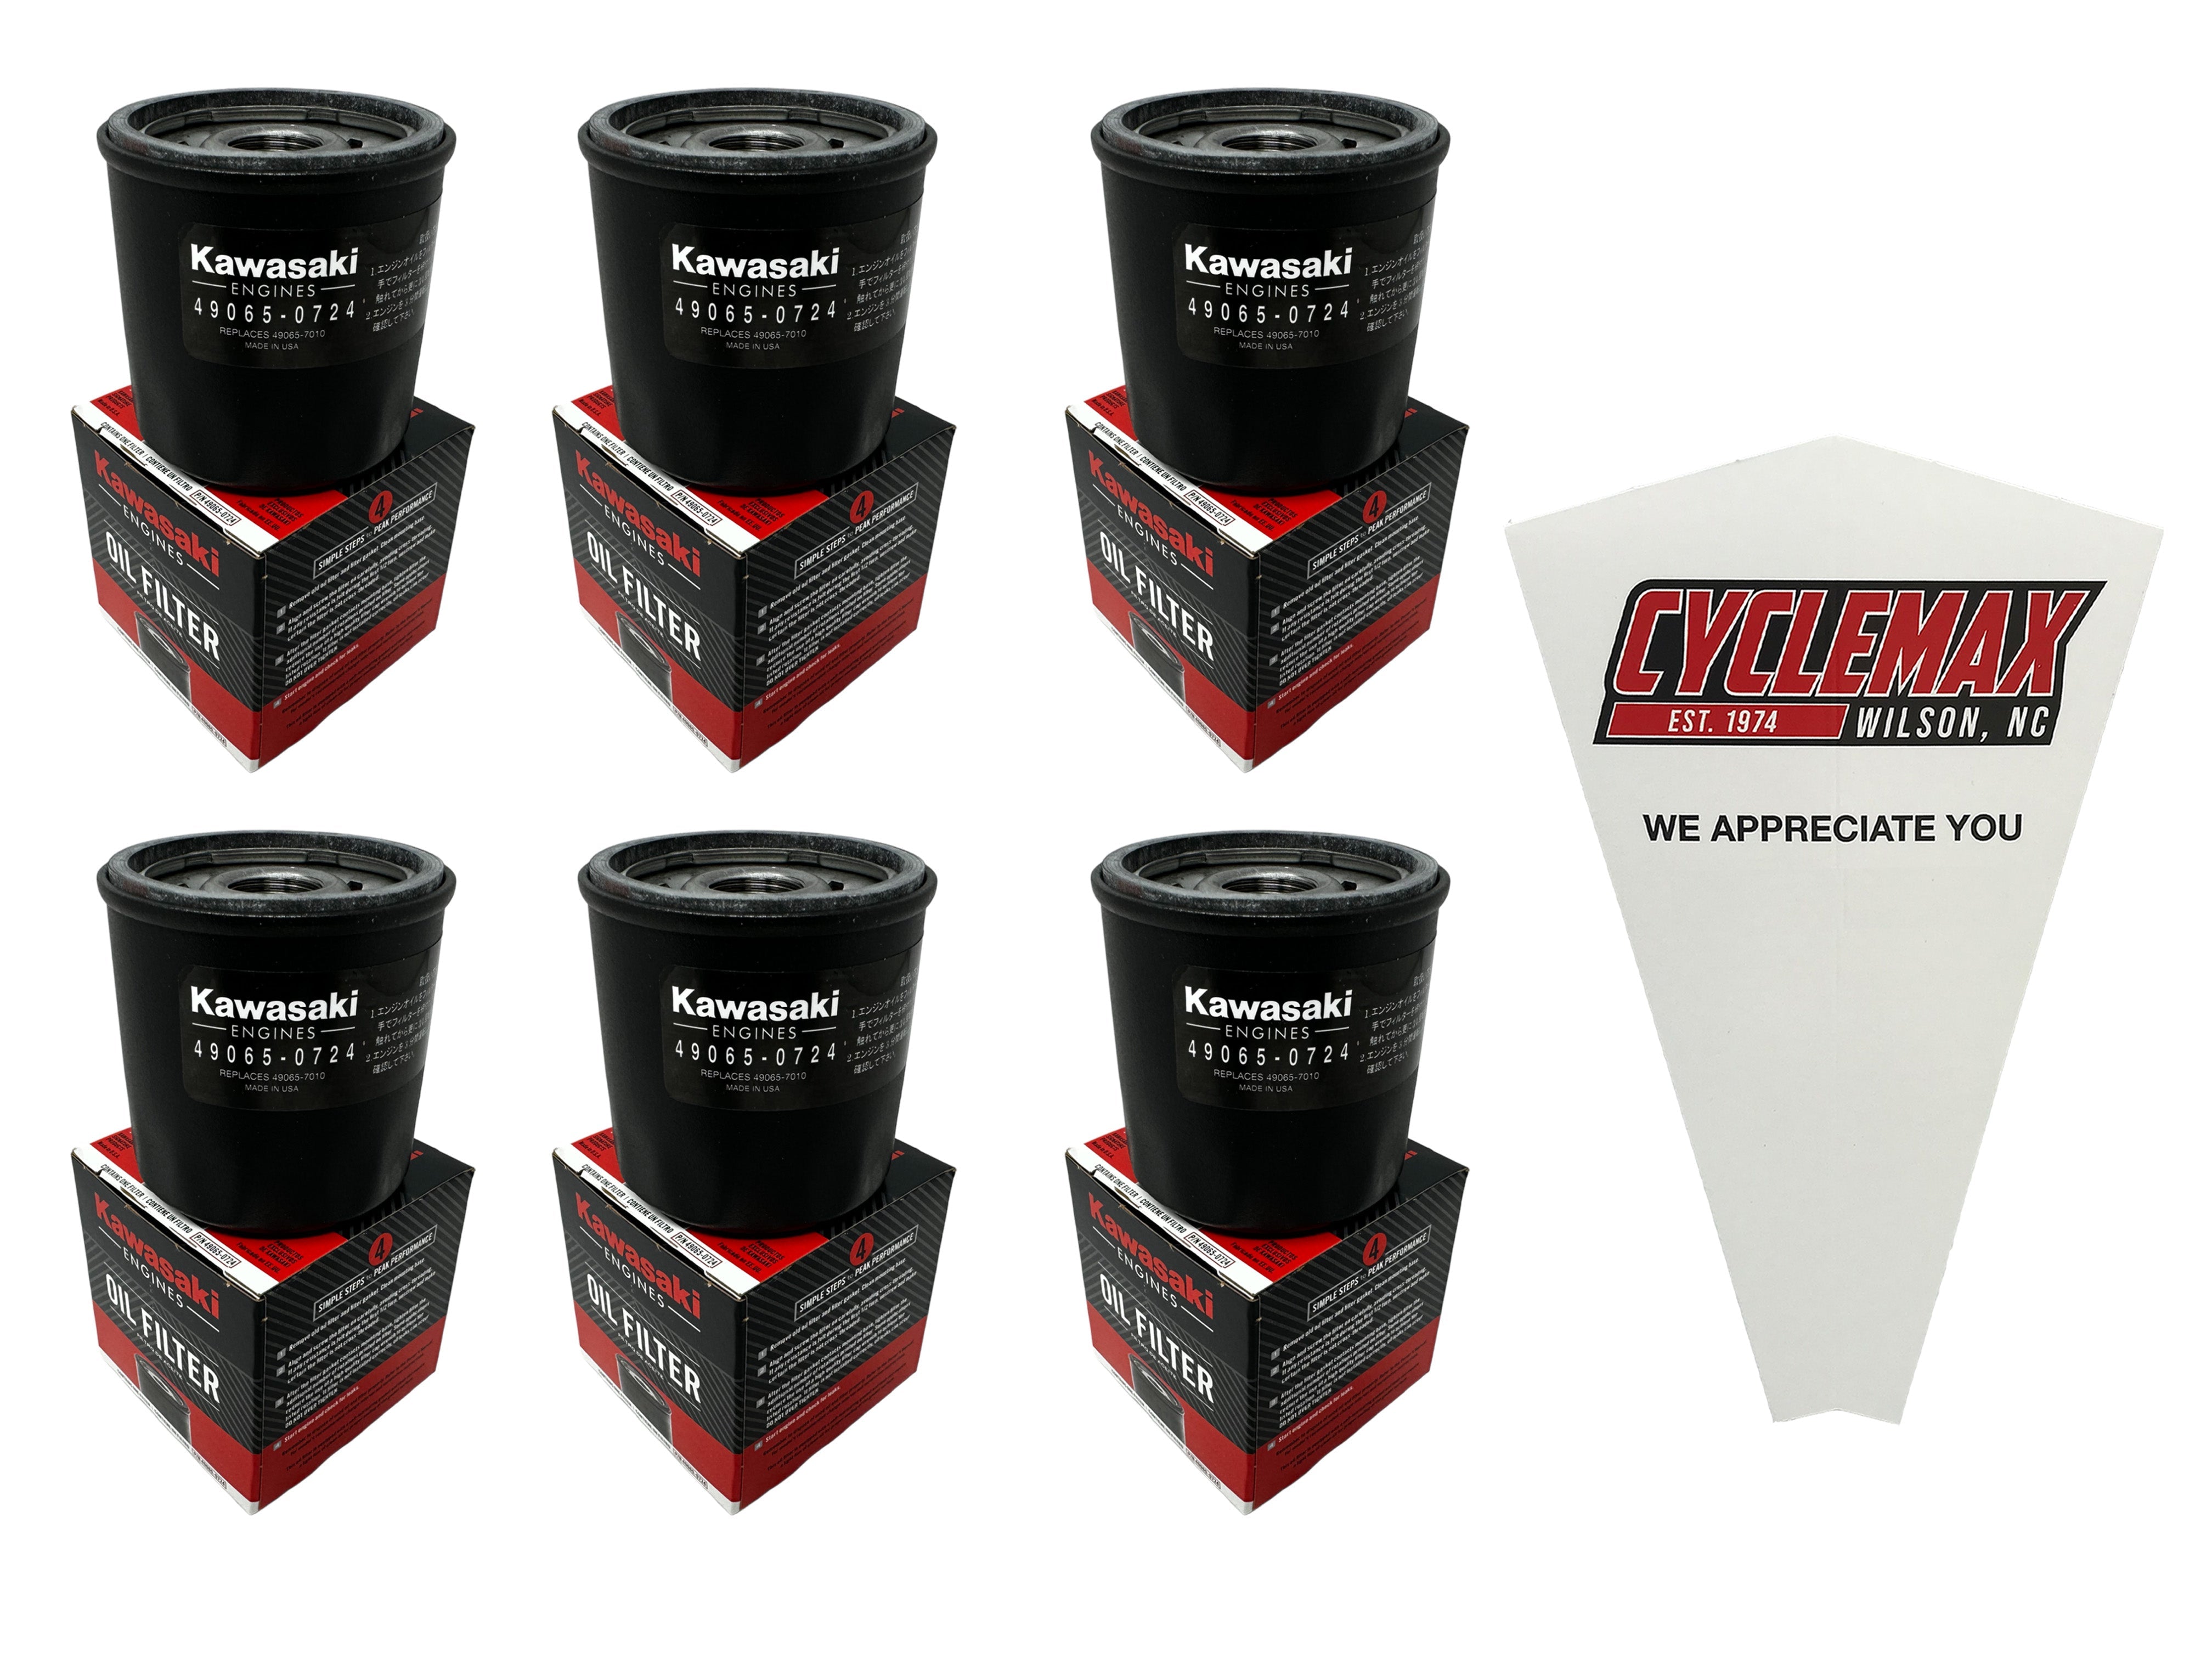 Cyclemax Six Pack for Kawasaki Oil Filter 49065-0724 Contains Six Filters and a Funnel